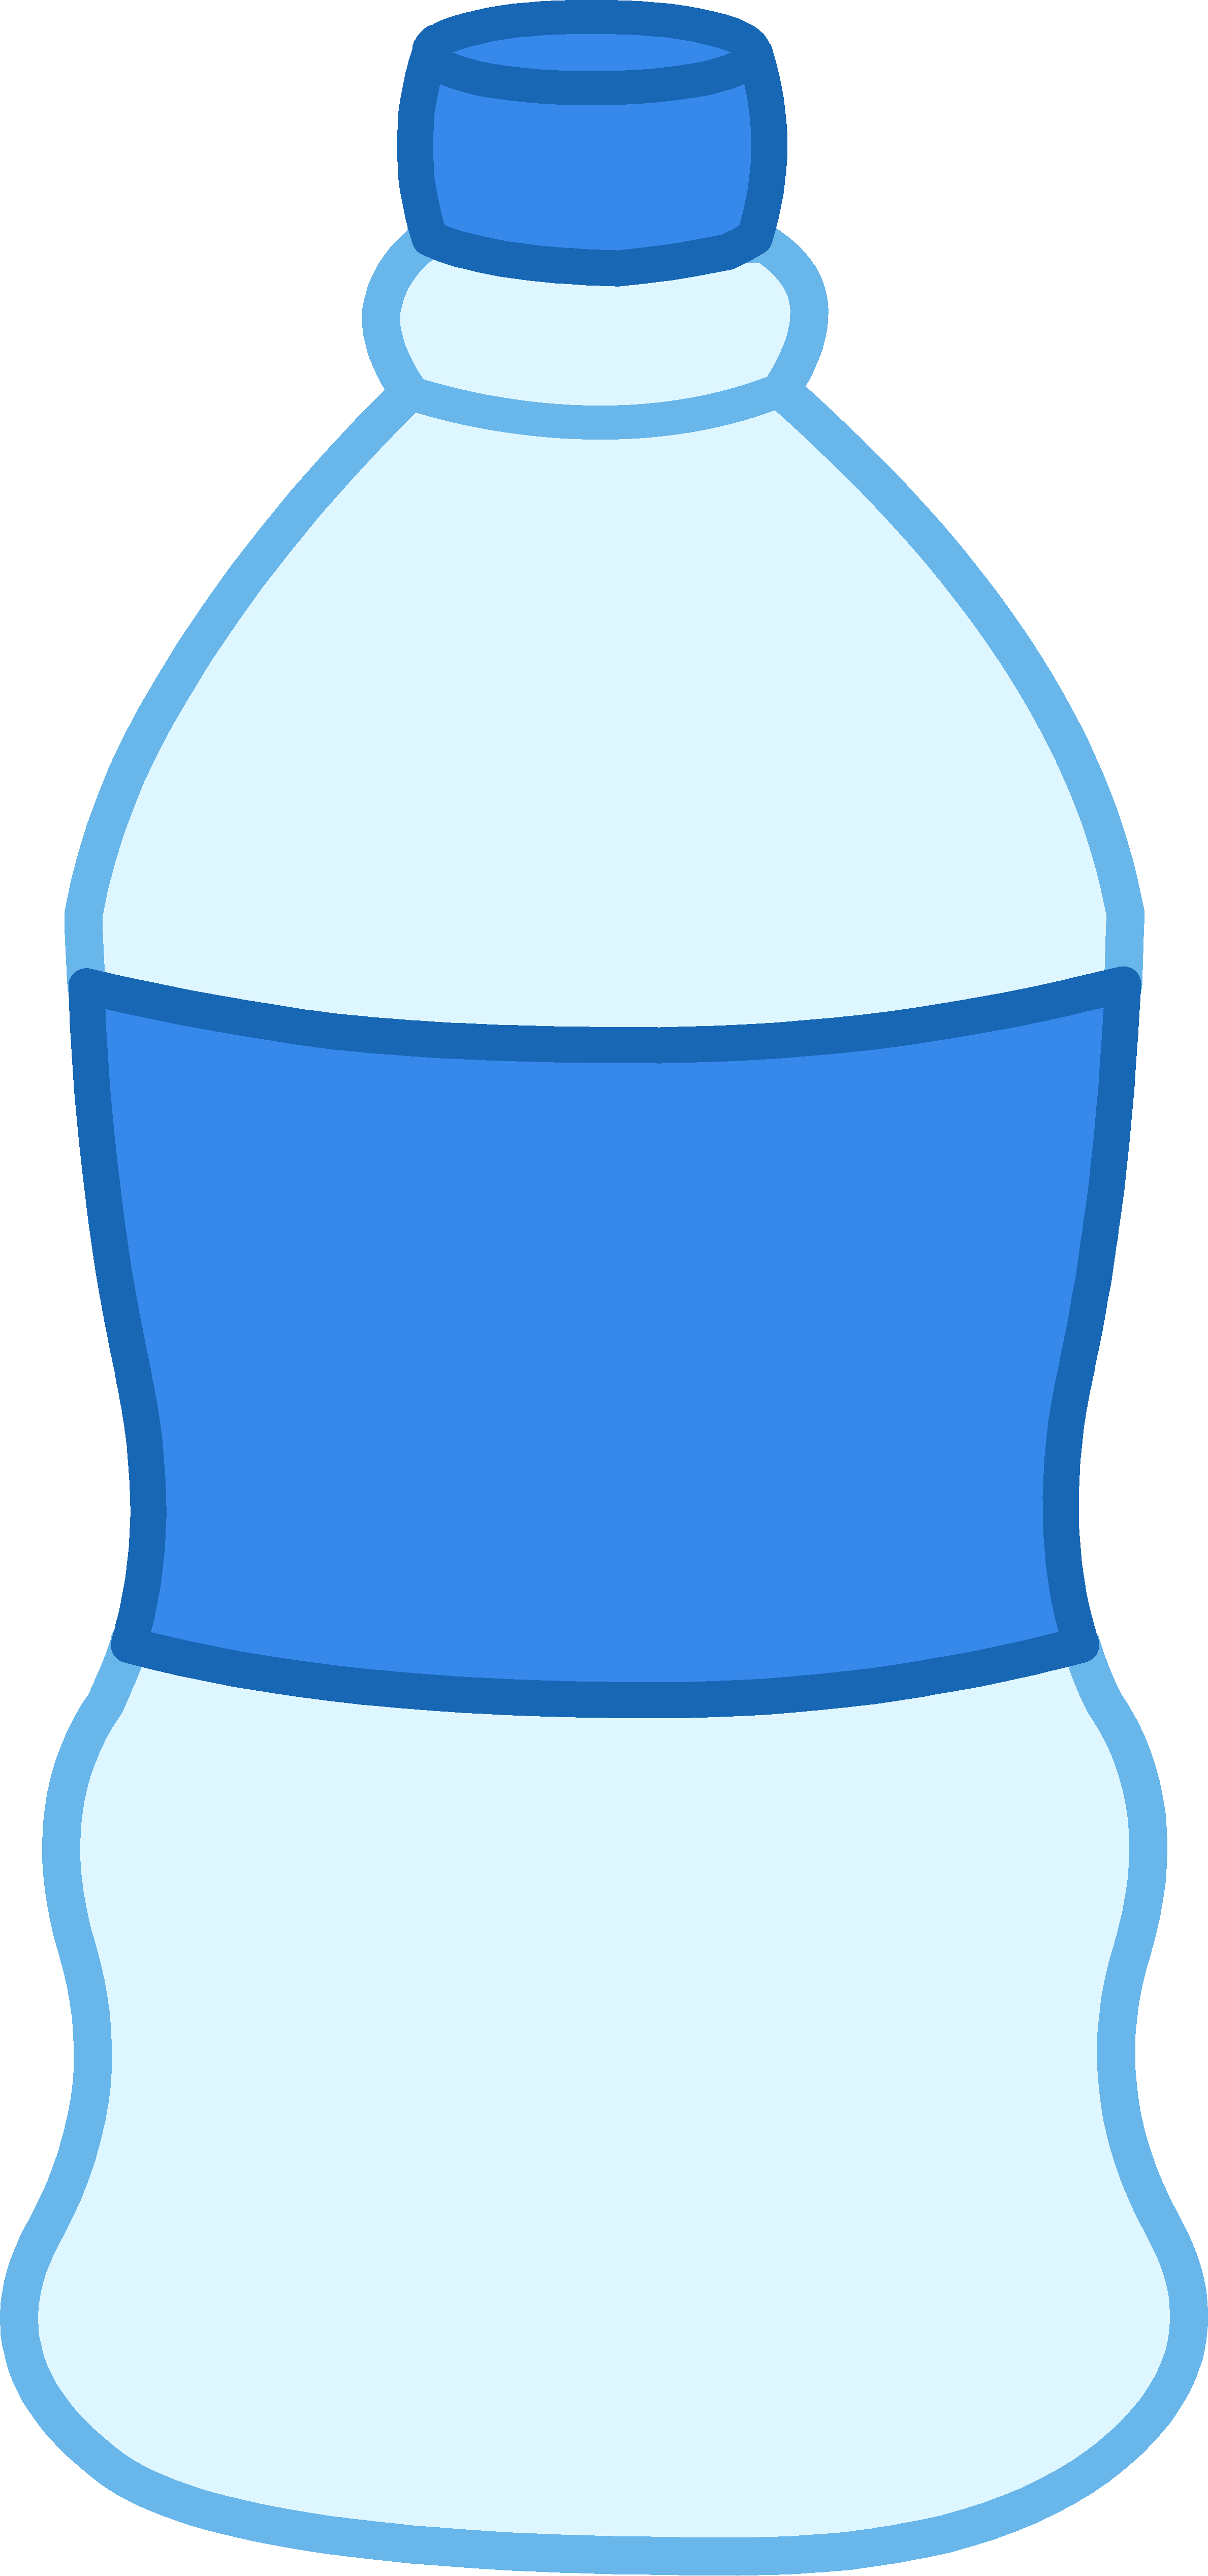 Water Bottle Clipart Black And White | Clipart library - Free 